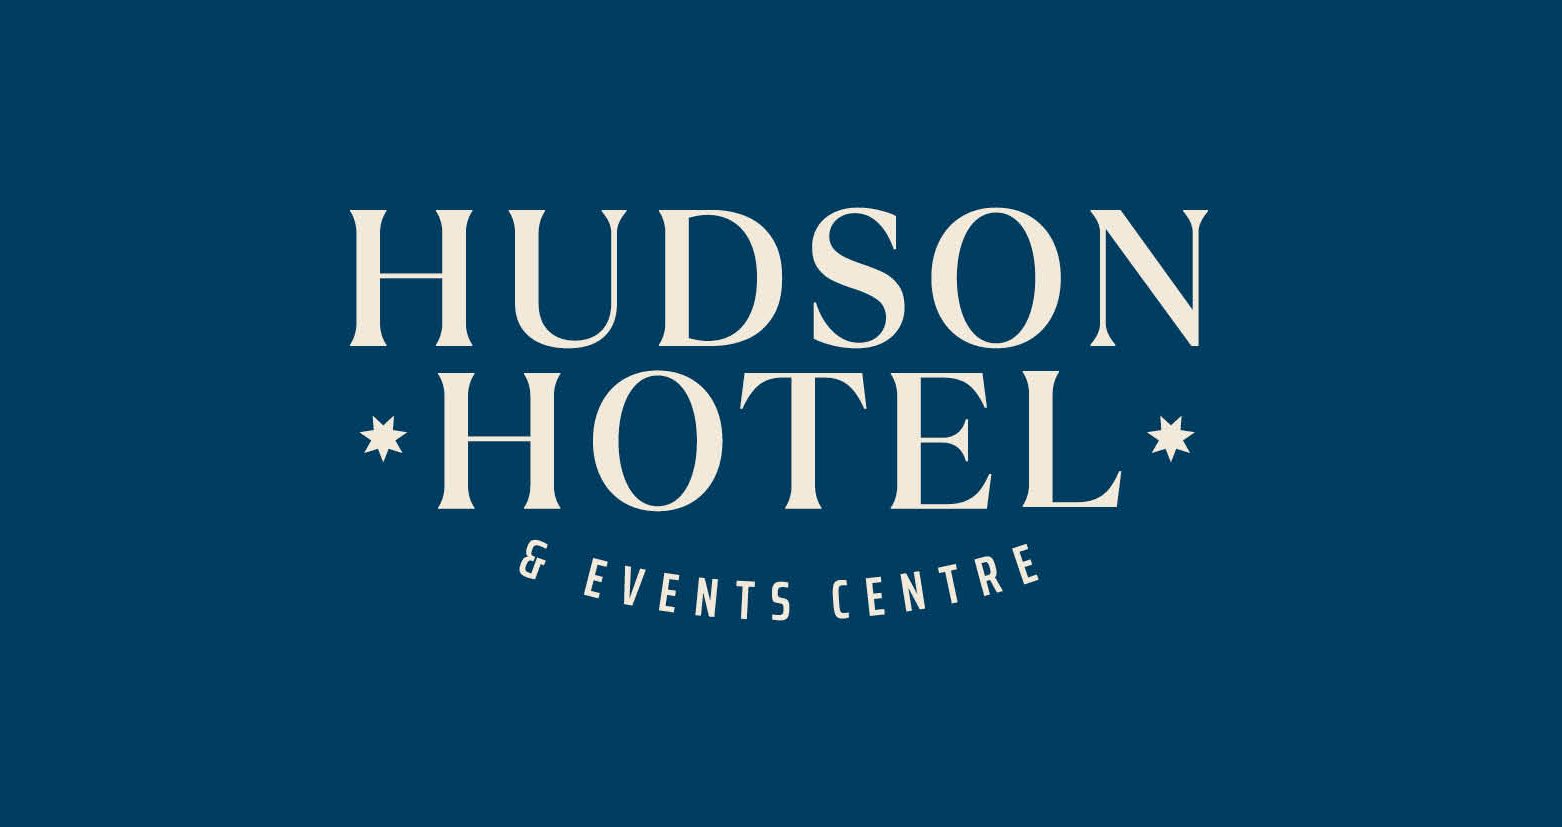 Hudson Hotel & Events Centre, (formerly known as Lily's) opened on ...